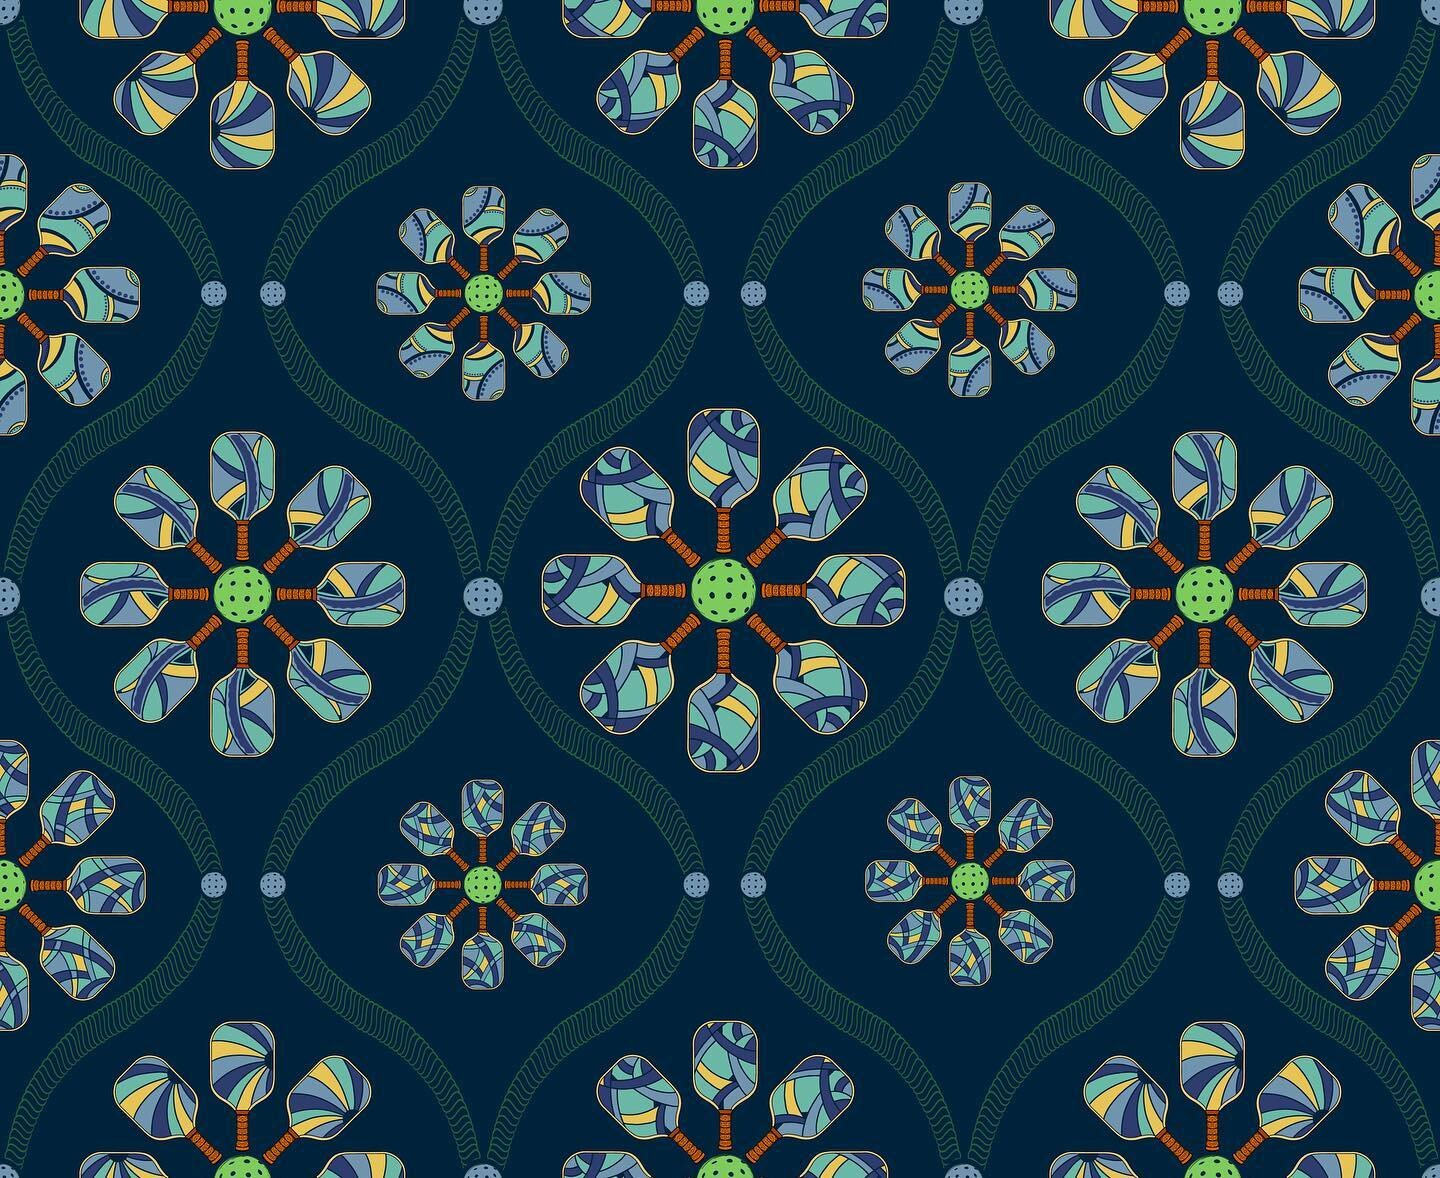 The pattern I created for the new challenge @Spoonflower, &ldquo;Court Sports&rdquo; highlighted pickle ball. I have never played but it looks like it would be fun to try&hellip;. Link to vote for patterns is in the bio.
.
.
.
.
#spoonflower #textile